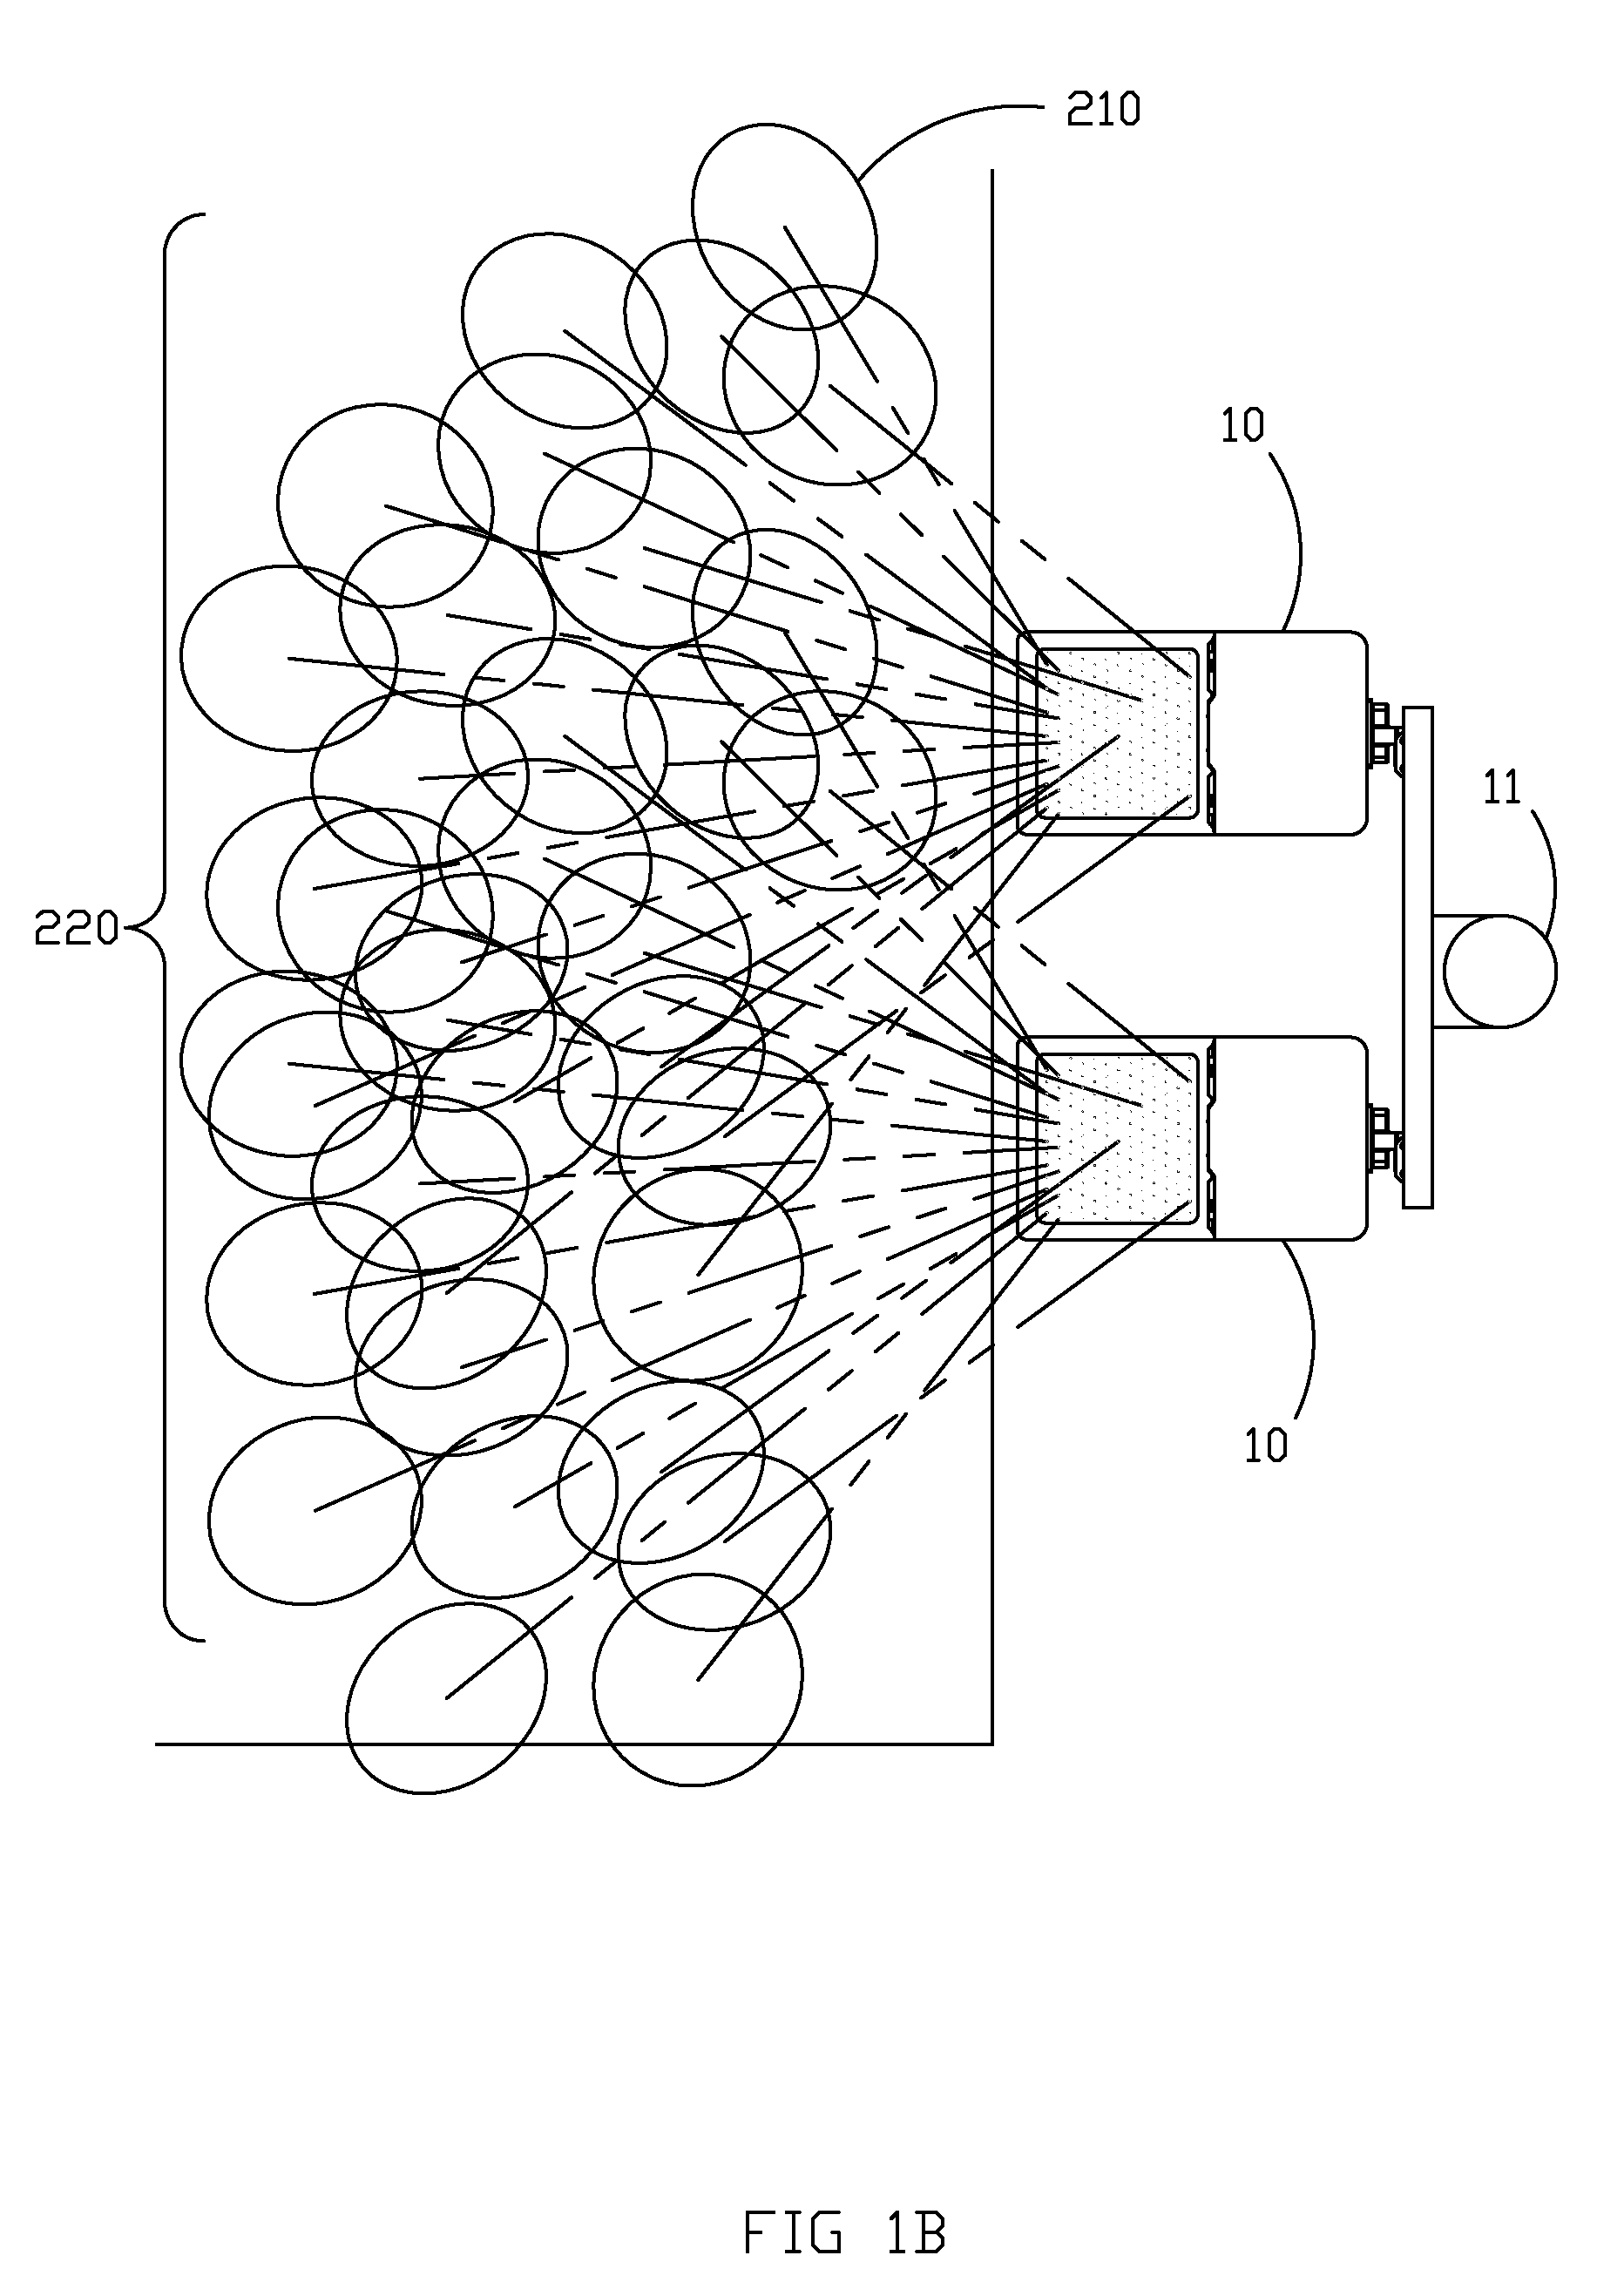 Apparatus, method, and system for highly controlled light distribution using multiple light sources